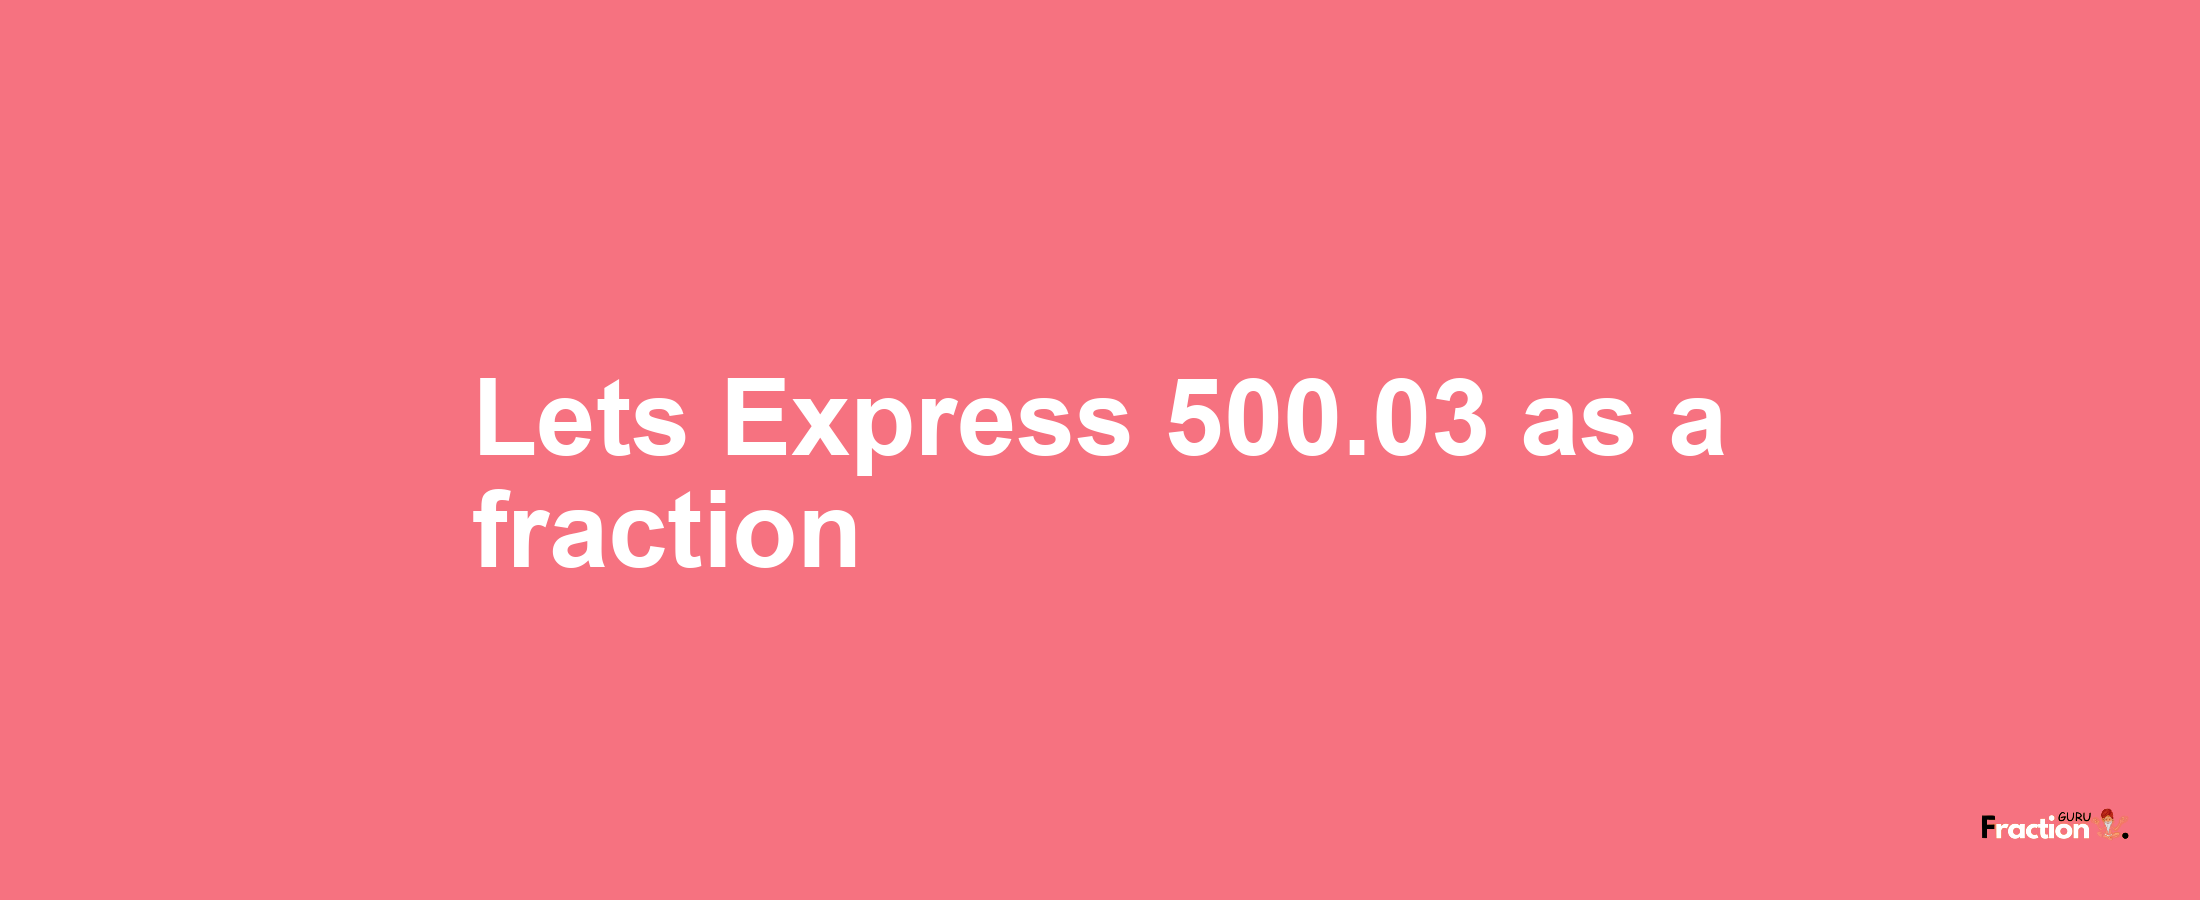 Lets Express 500.03 as afraction